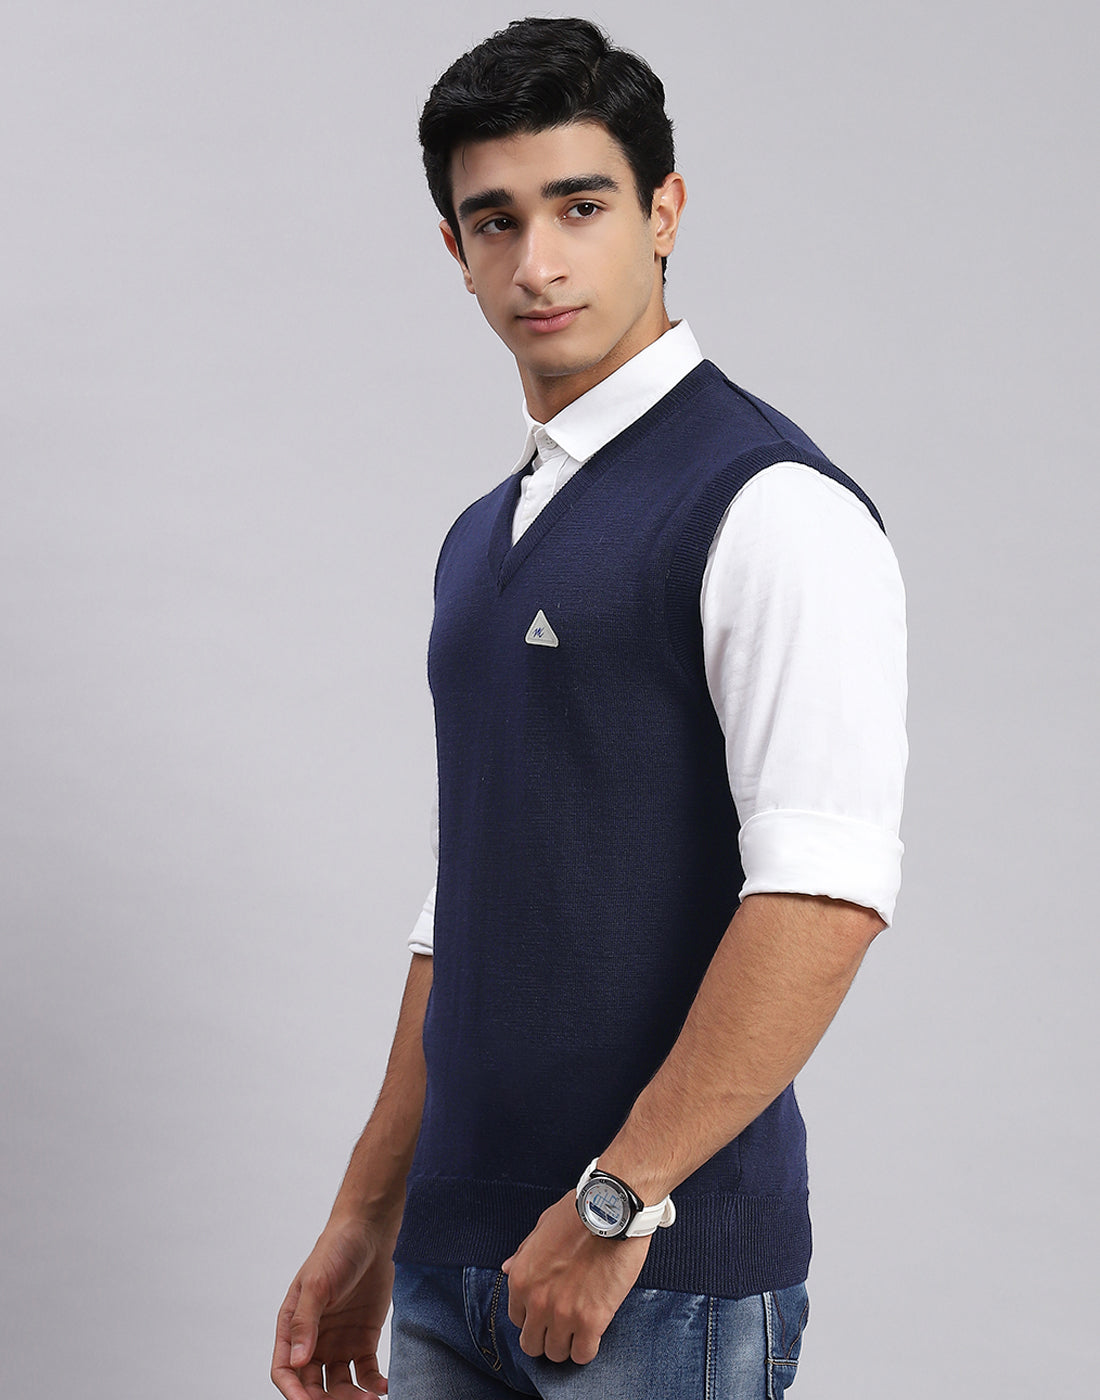 Men Navy Blue Solid V Neck Sleeveless Sweaters/Pullovers